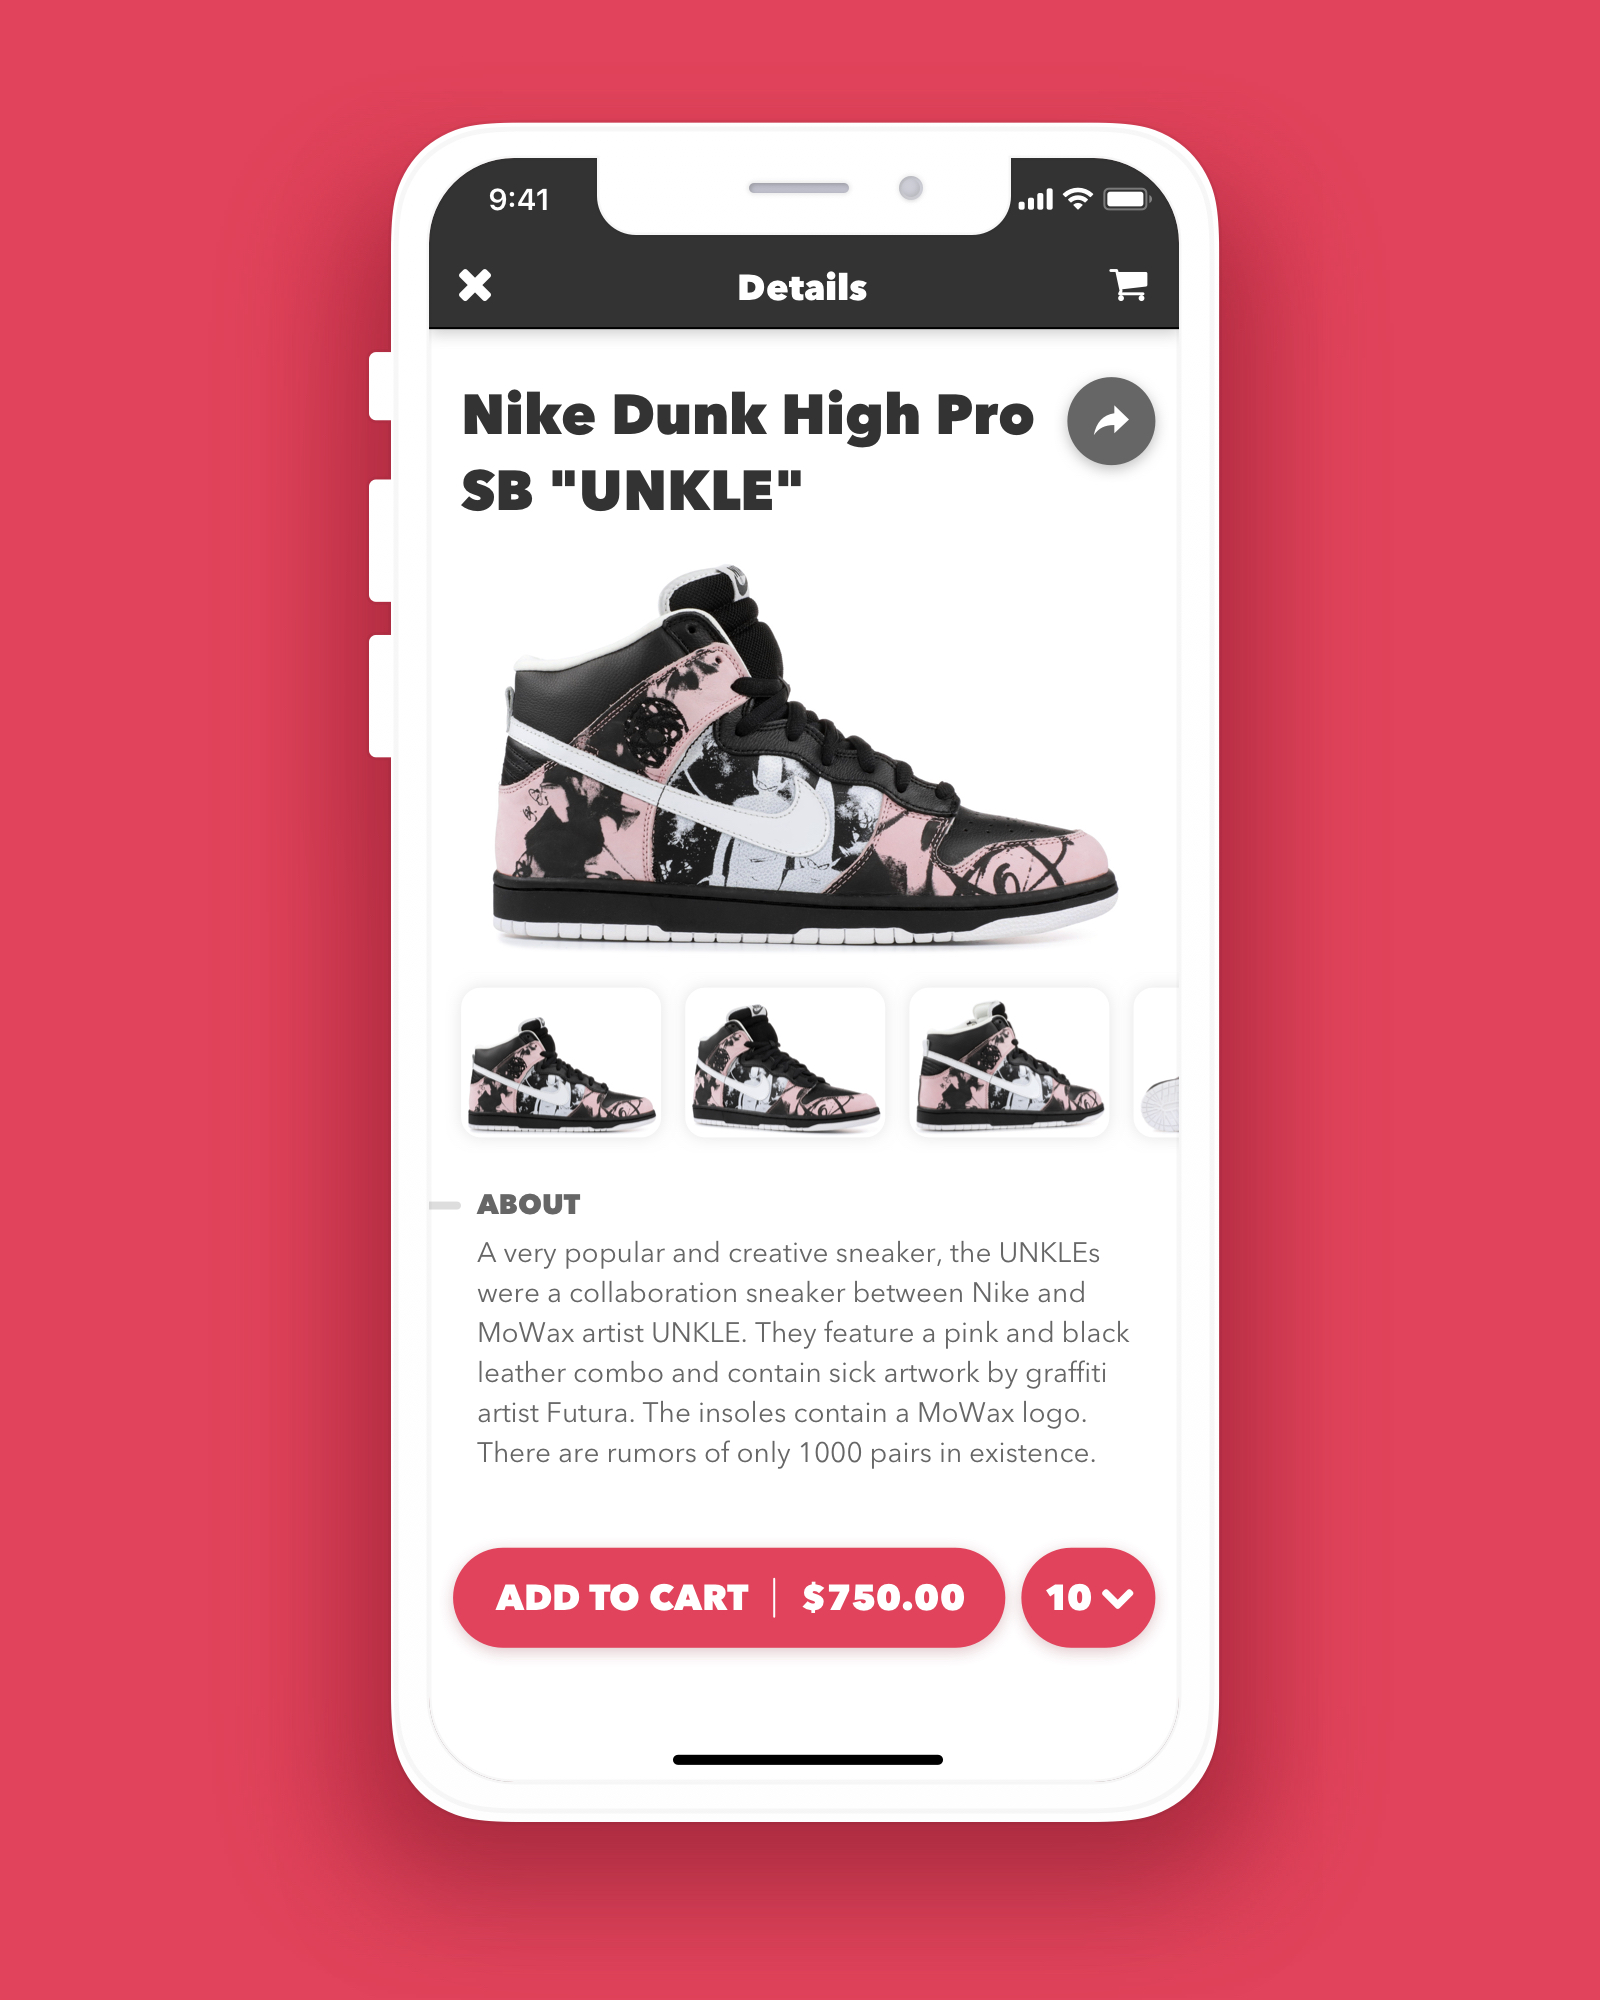 Nike Dunk High Pro SB UNKLE Share Button – Daily UI 010 by Brian